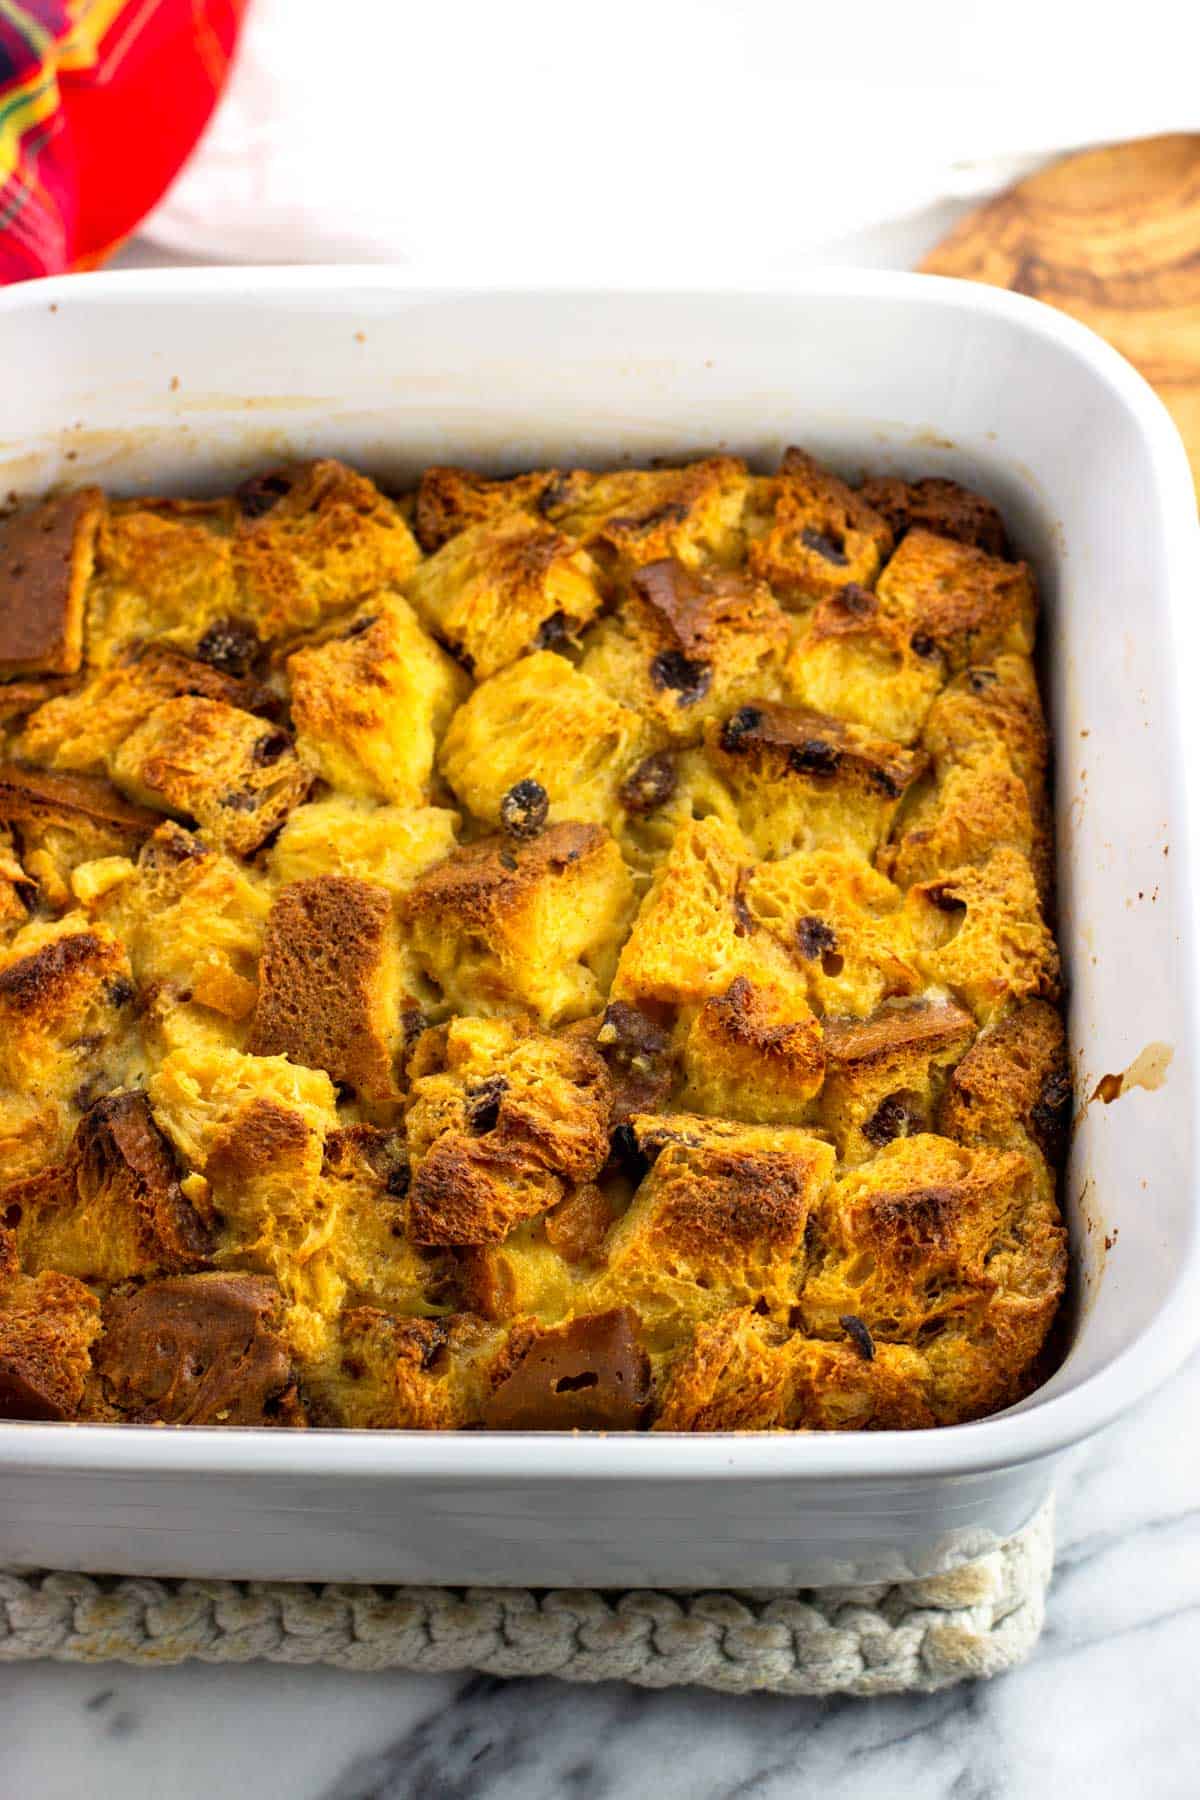 The baked panettone bread pudding in the baking dish.